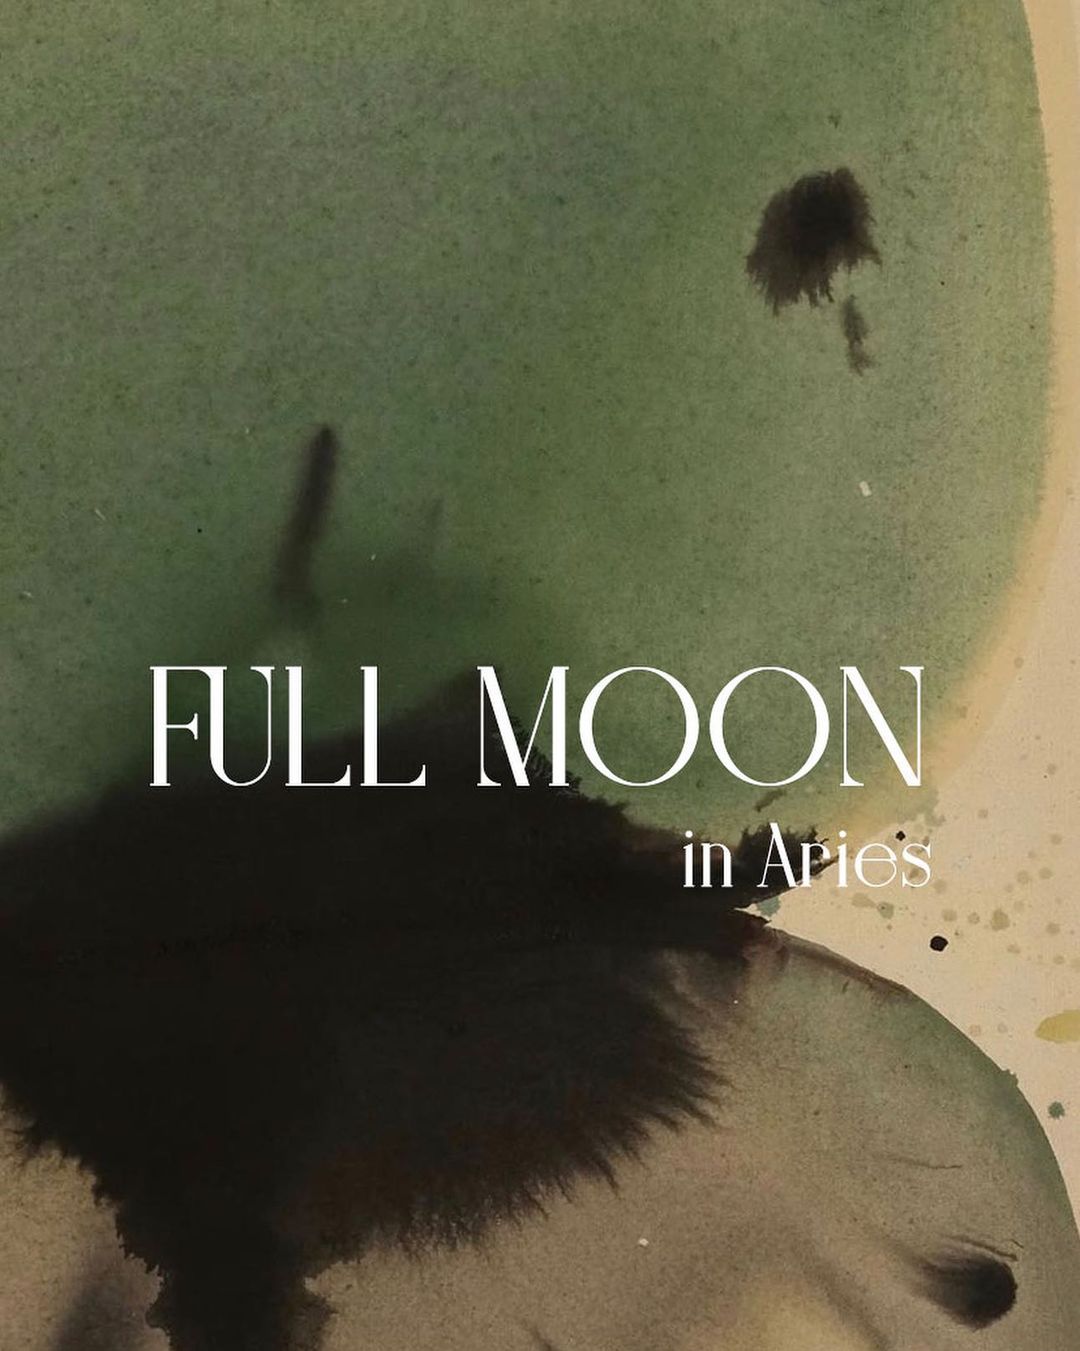 The Full Moon in Aries by Quantic Yin